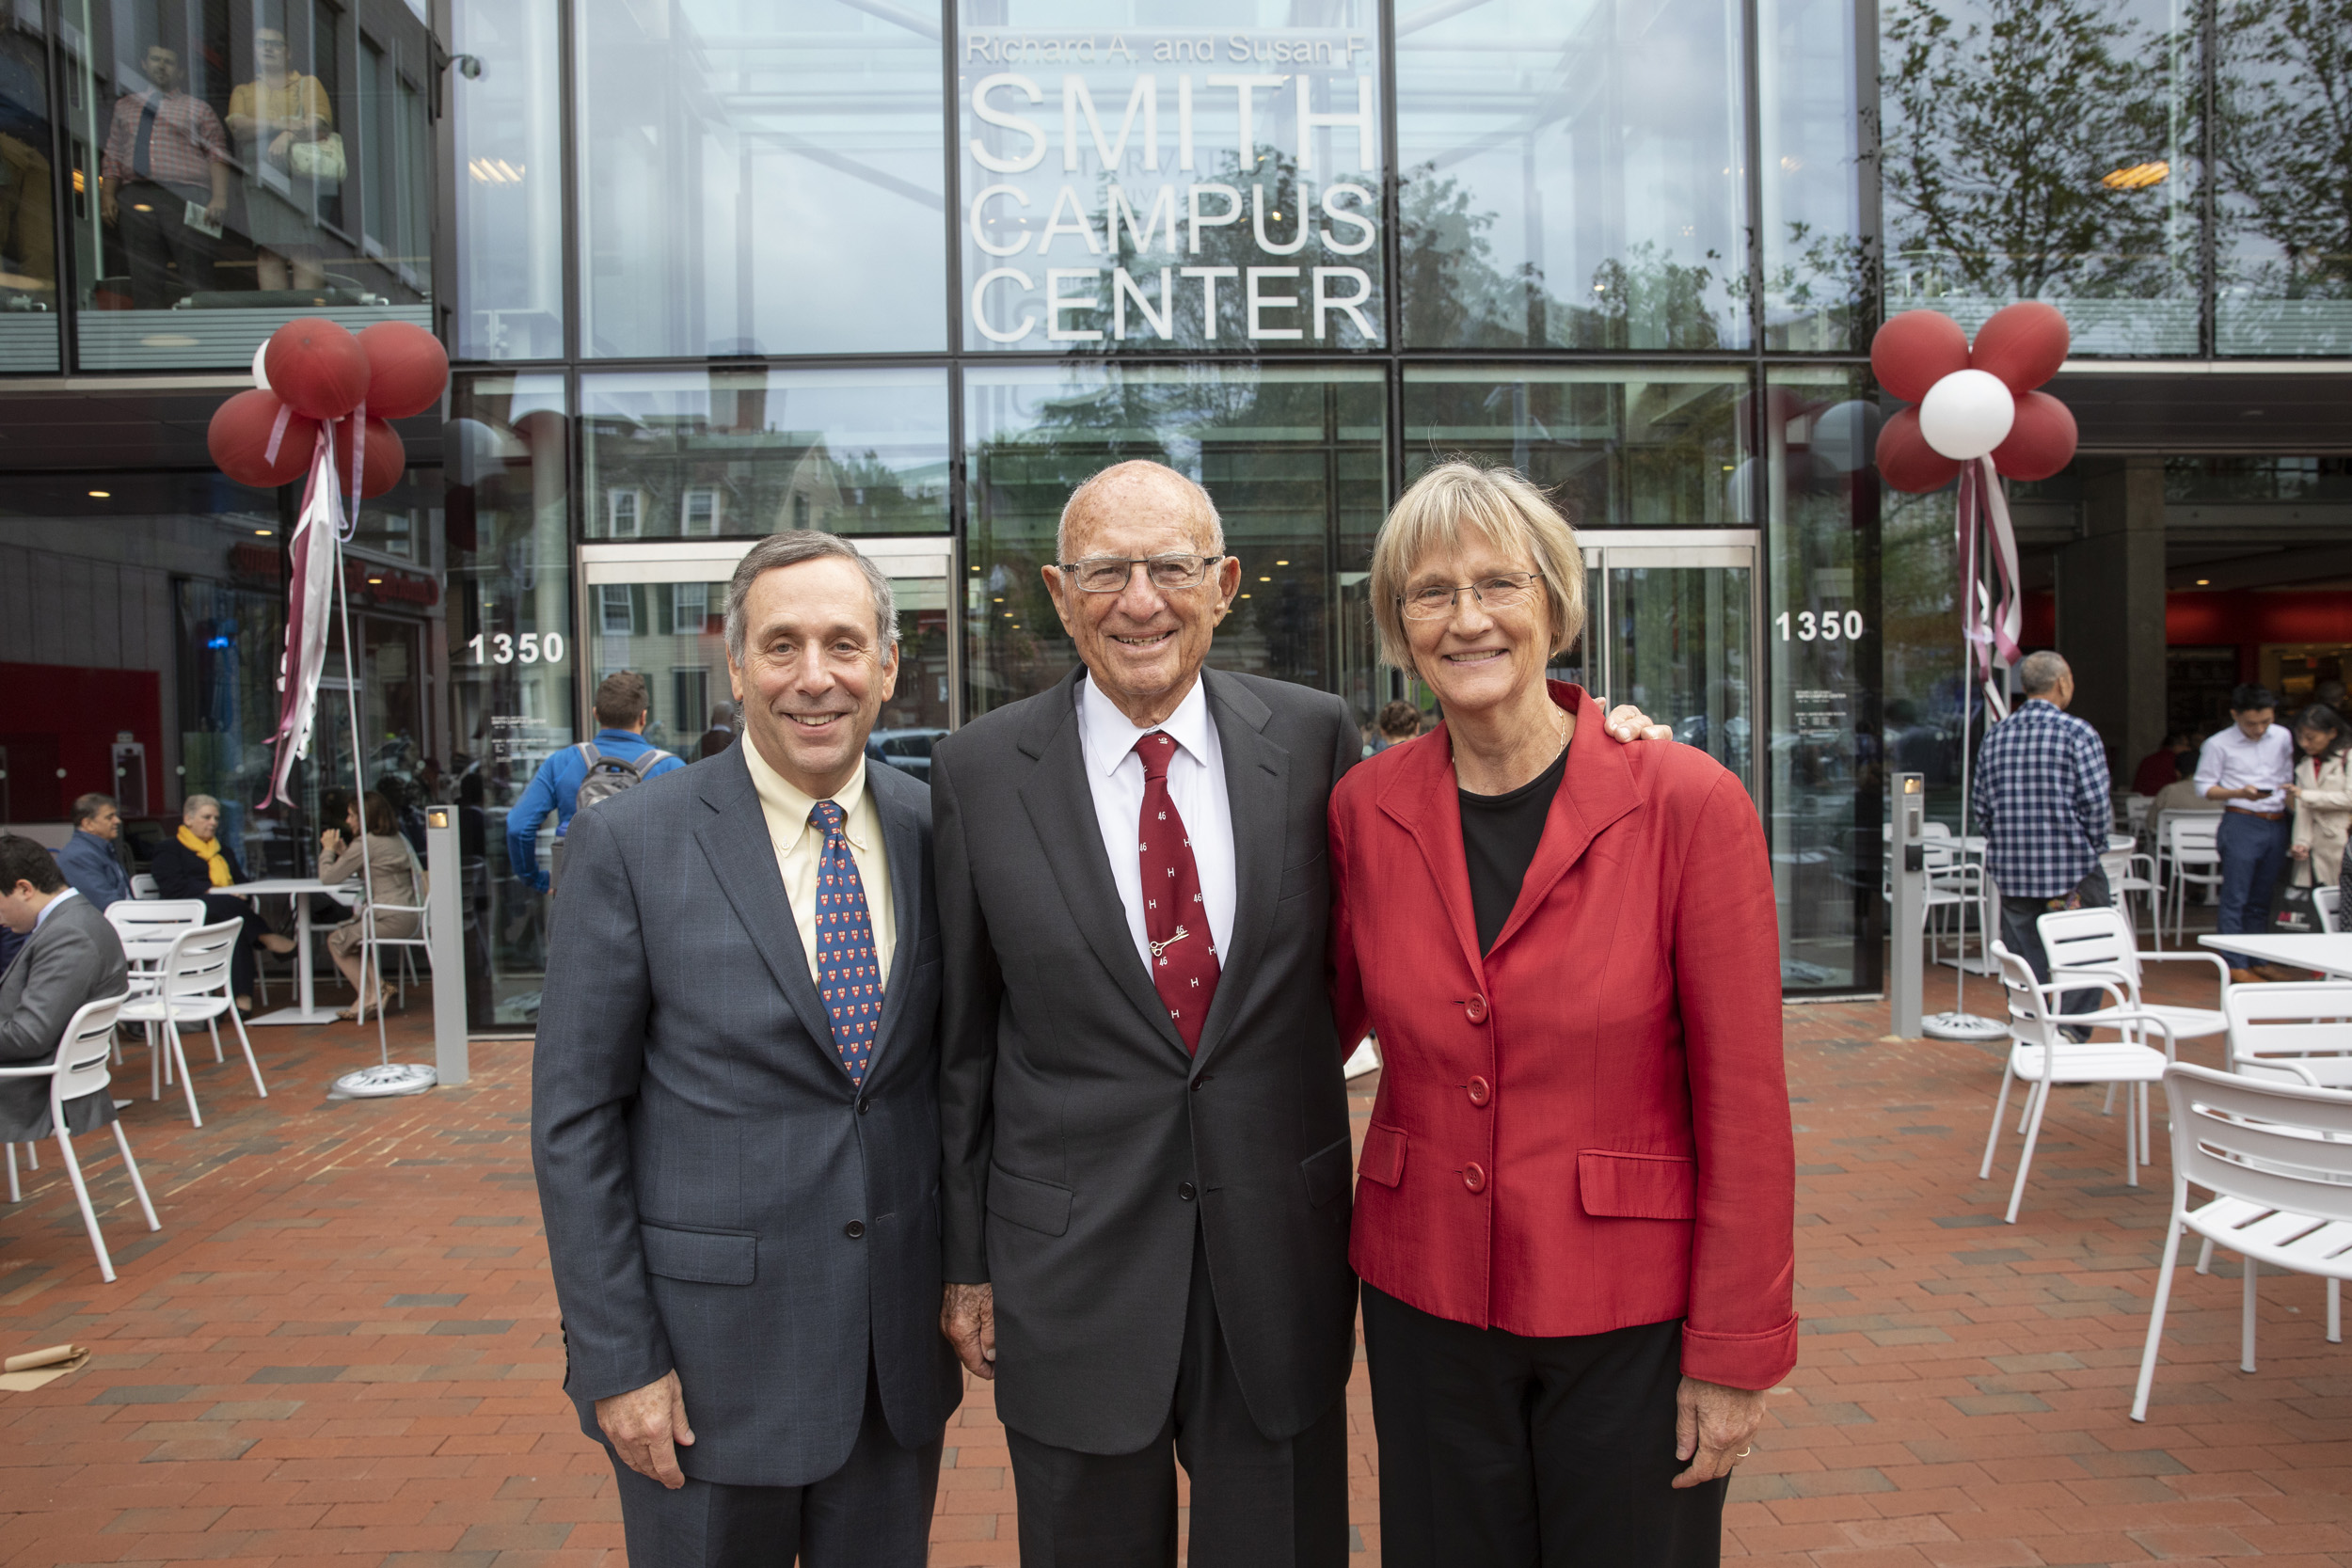 Larry Bacow, Richard A. Smith, and Drew Faust.